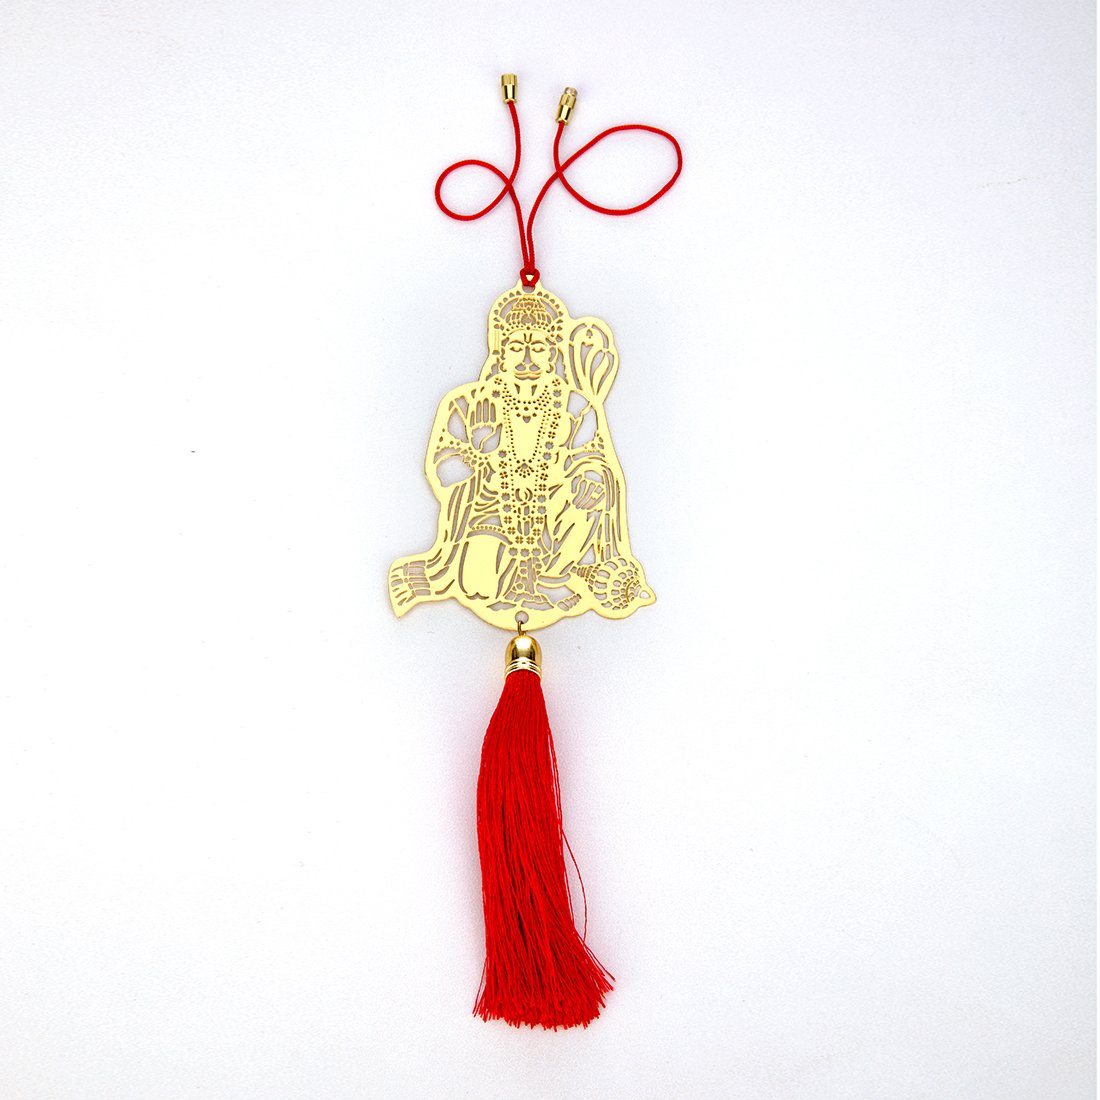 Pack of 2 - Jai Hanuman Bajrang Bali Hanging Accessories for Car rear view mirror Décor in Brass